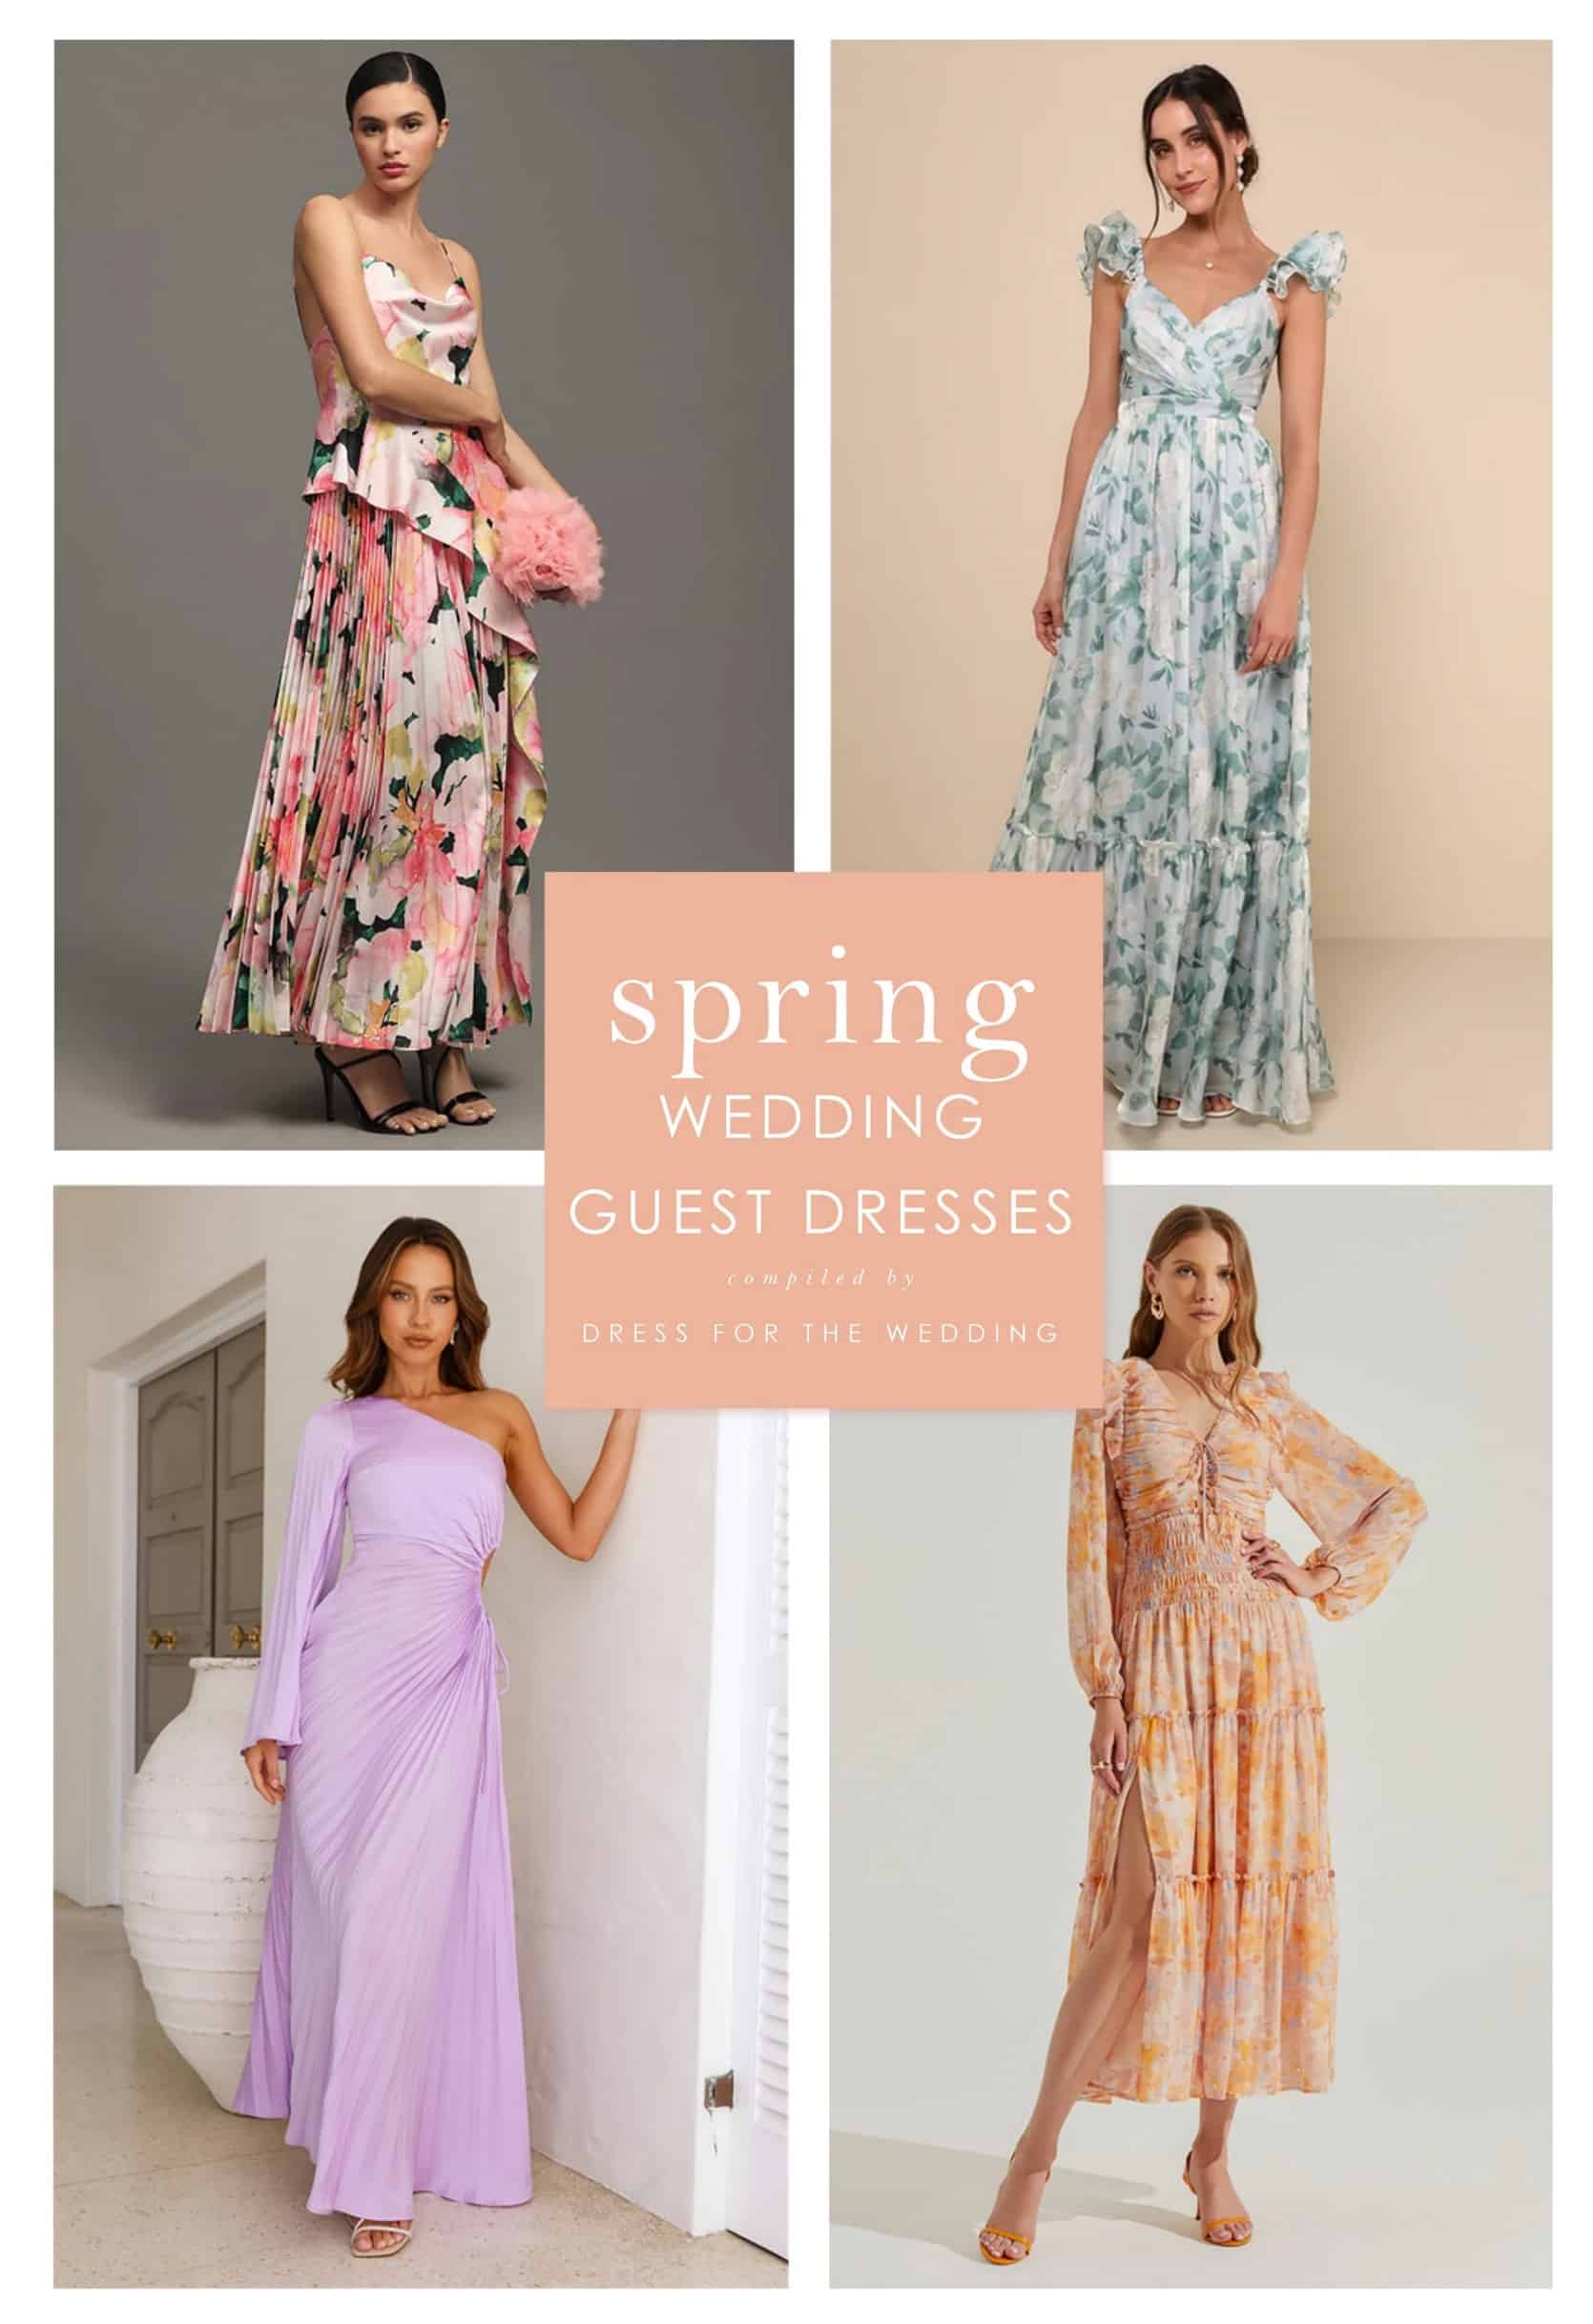 How to Be The Best Dressed Wedding Guest This Spring - HOUSE of